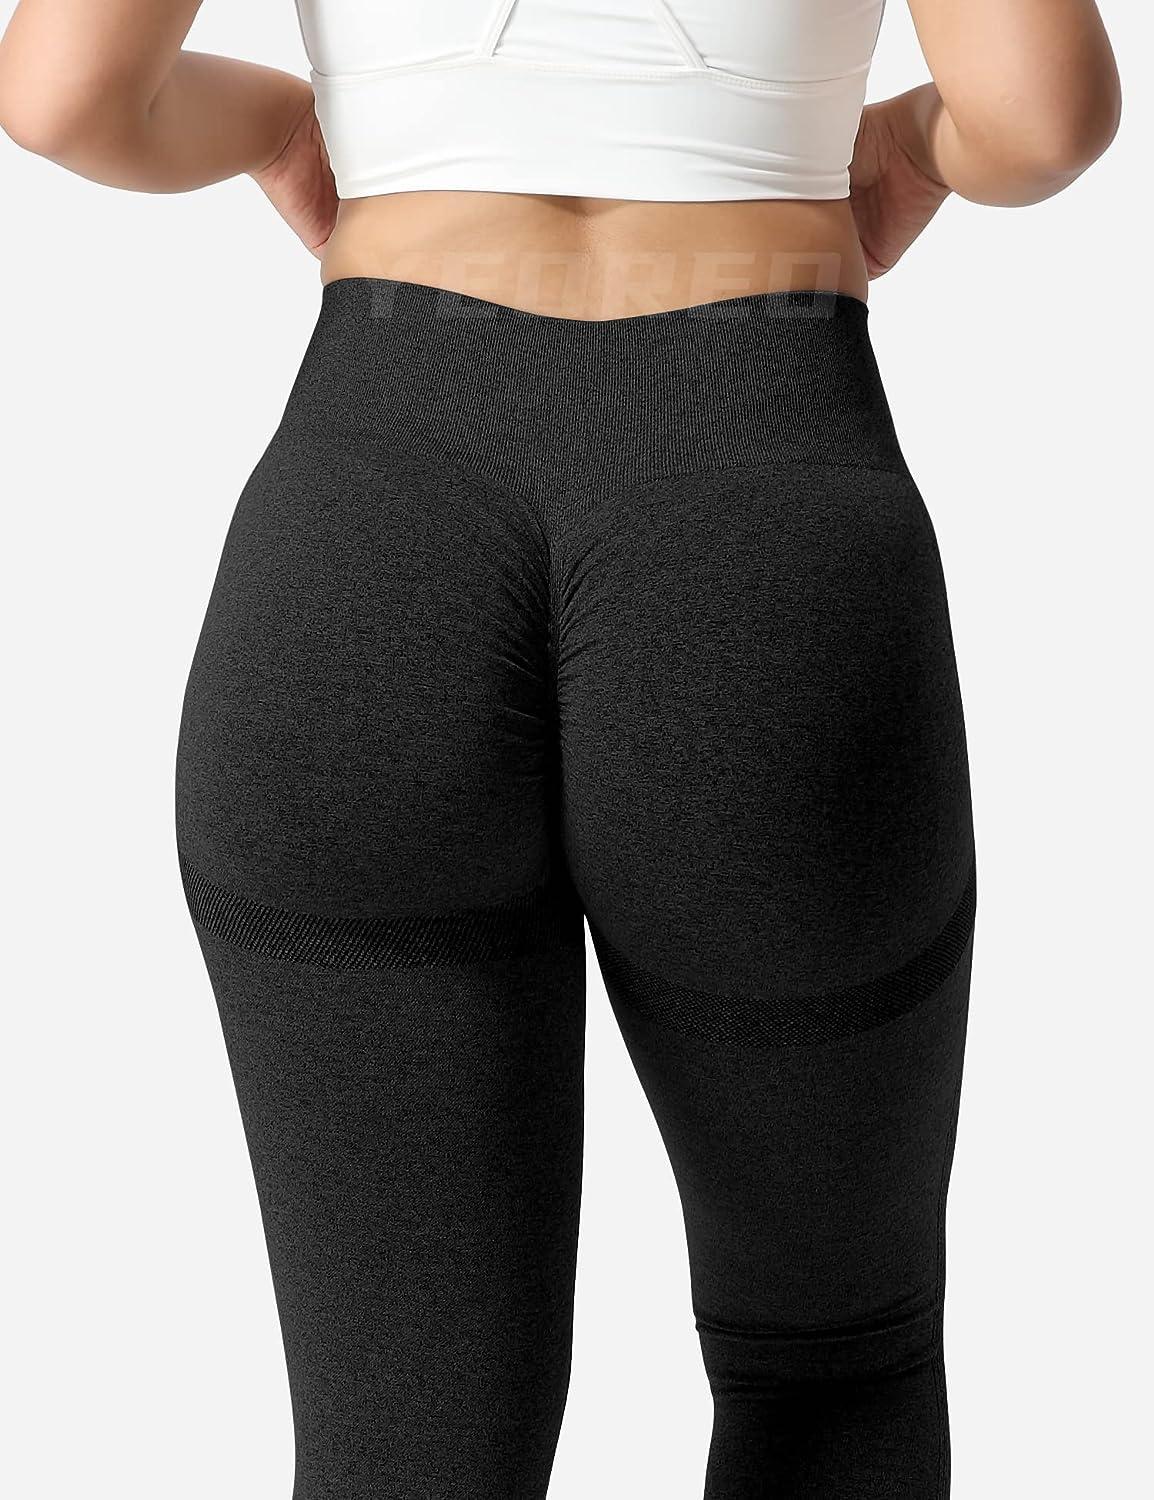 Women Scrunch Butt Lifting Leggings Booty High Waisted Workout Ruched Yoga  Pants 